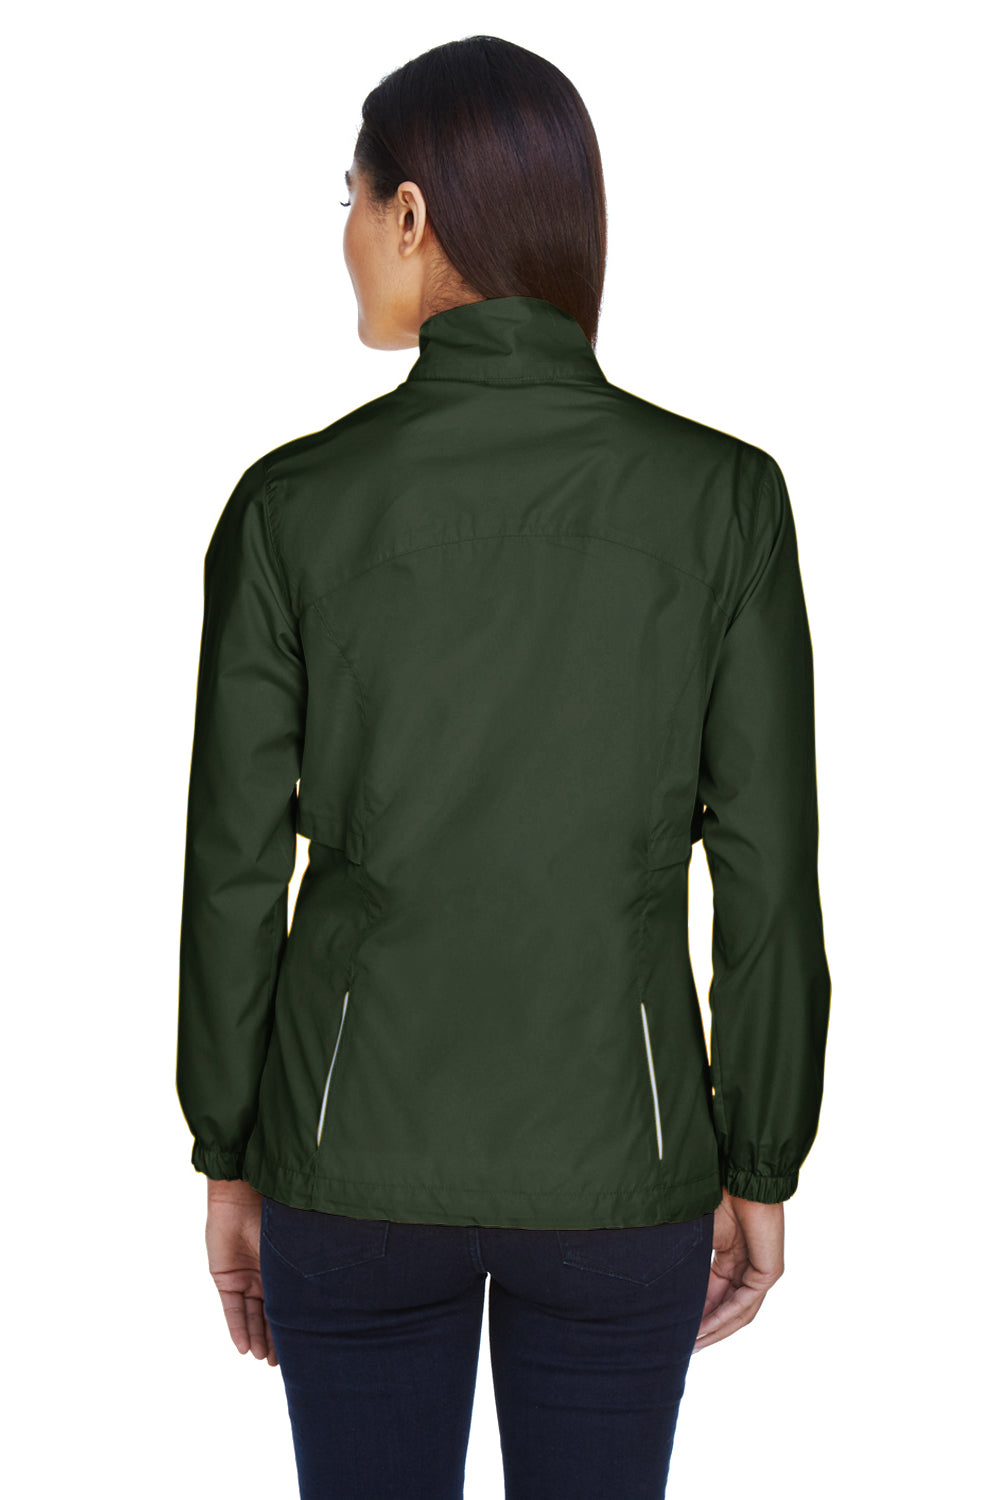 Core 365 78183 Womens Motivate Water Resistant Full Zip Jacket Forest Green Back